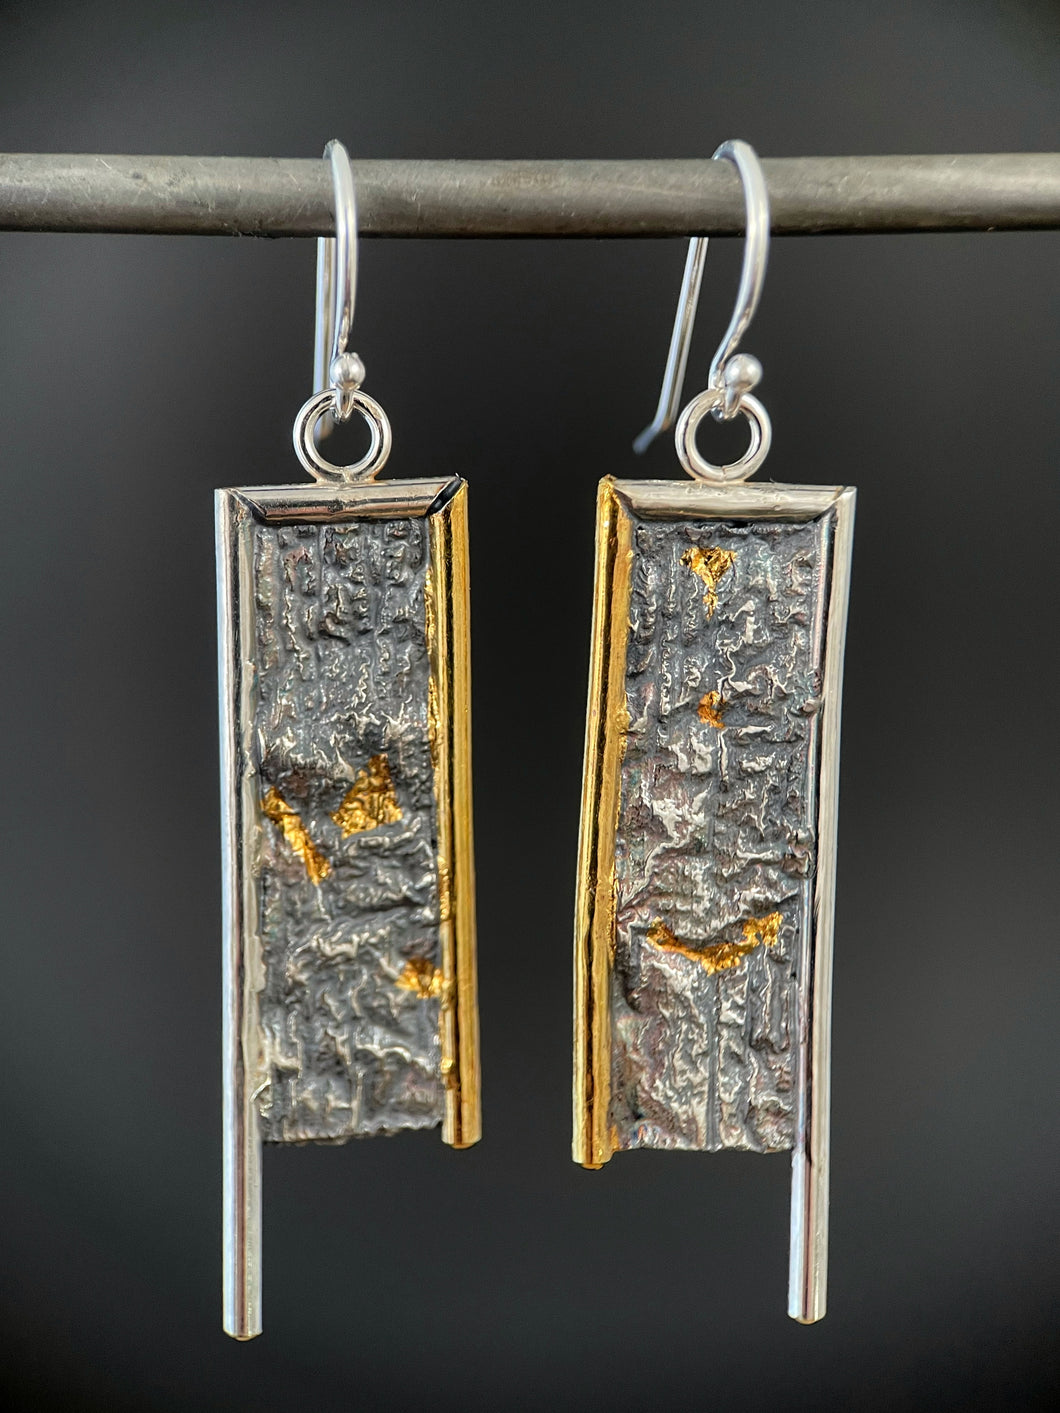 A rectangular pair of earrings, hanging vertically. The top and both sides are framed in wire - silver on the top and outside edge, gold on the inside edge. The outside border on each earring hangs lower, with the inside dropping just below the edge of the rectangle. The center of the rectangle is reticulated silver, in a textured, organic, terrain-like pattern. There are pockets of gold in some of the recessed parts.